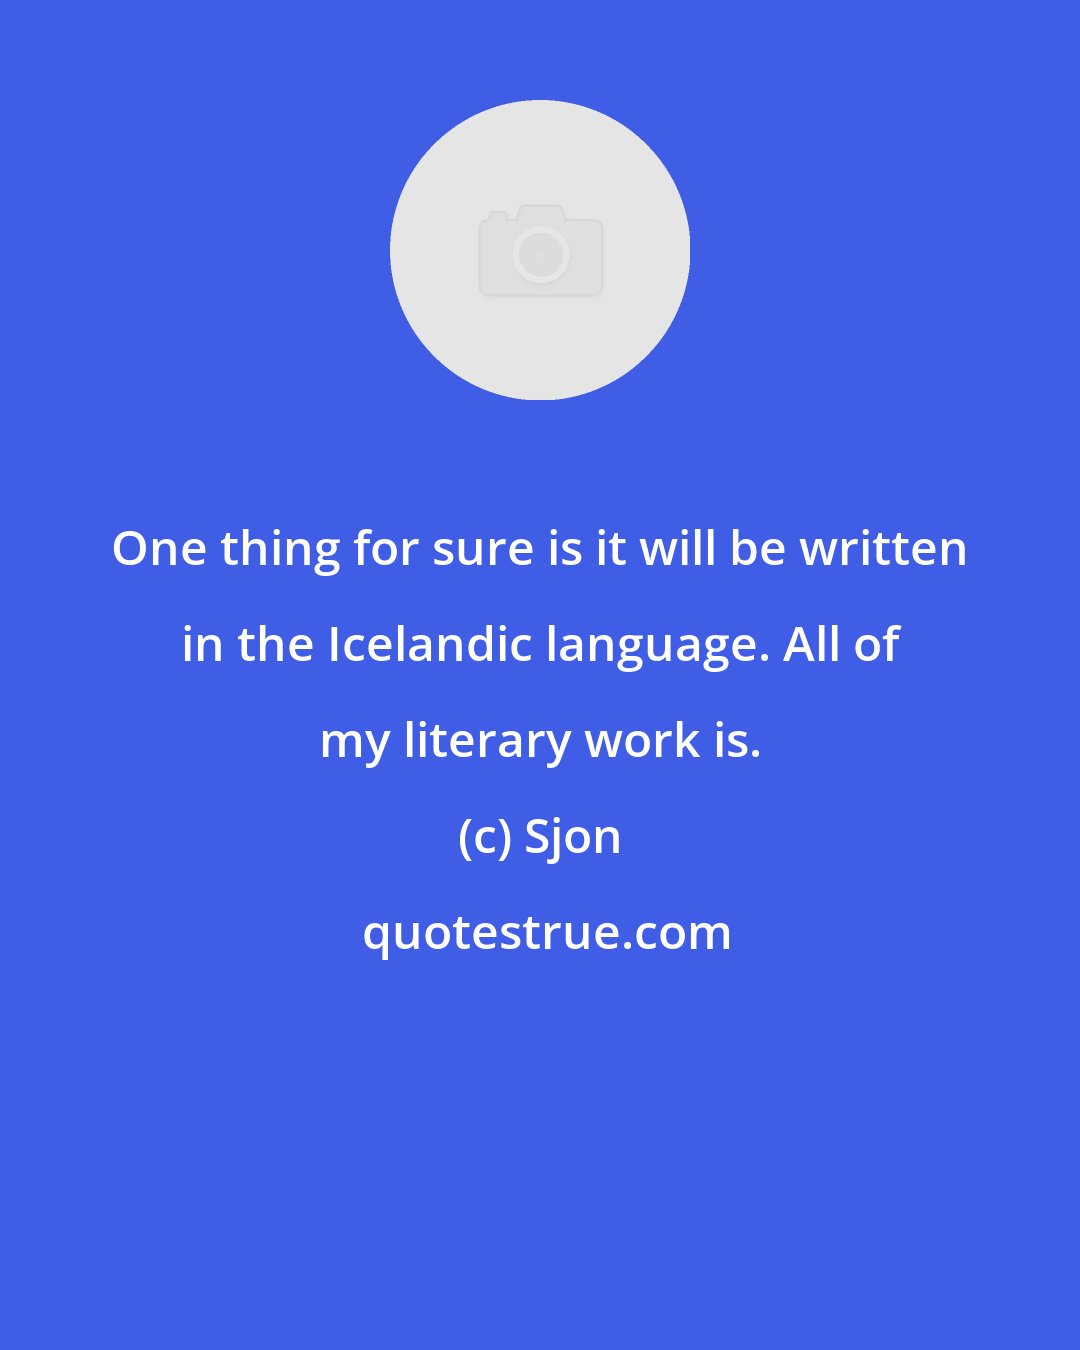 Sjon: One thing for sure is it will be written in the Icelandic language. All of my literary work is.